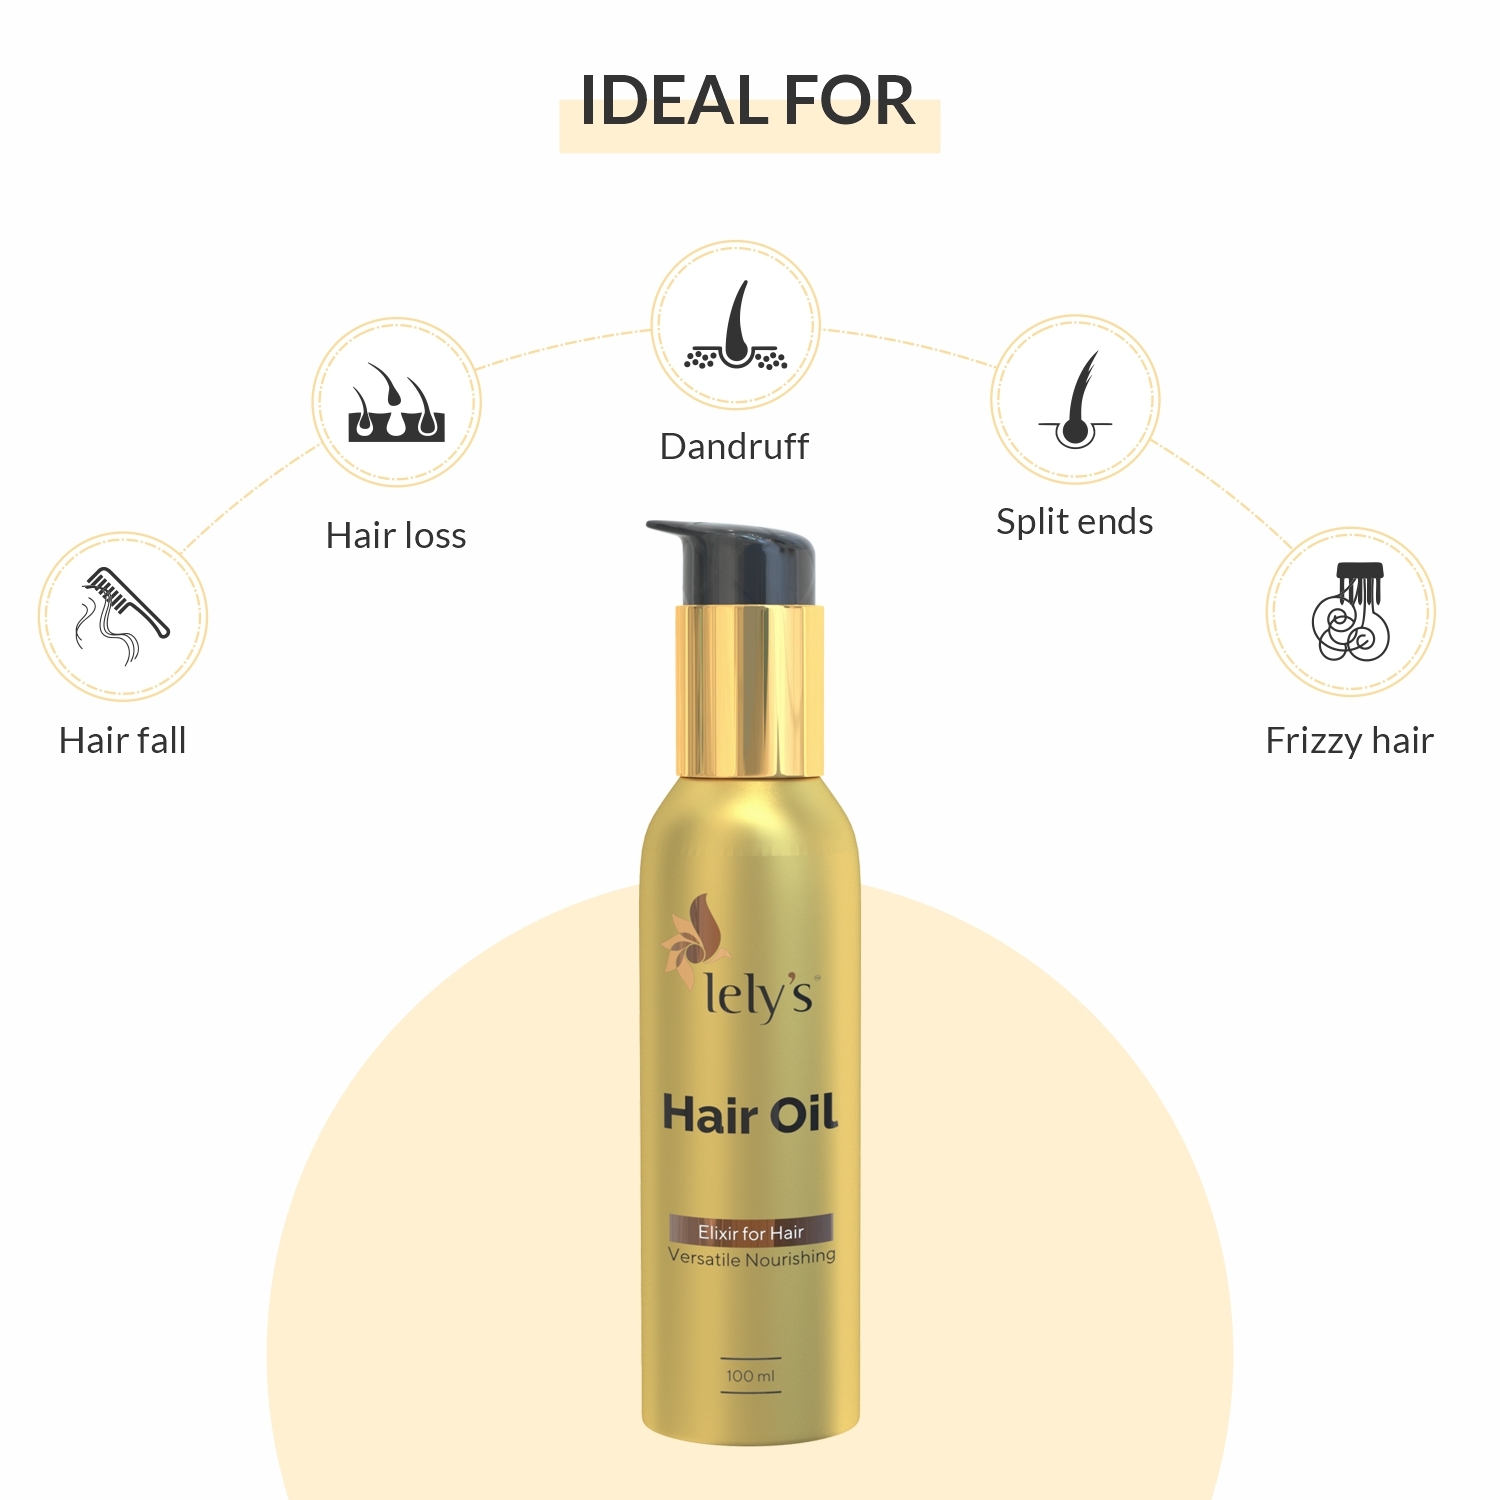 lely's | Lely’s Hair Oil For Hair Growth - Transforms Dry-Brittle Hair Into Silky, Reduces Hair Fall, Shiny And Smooth Hair, Soft And Firm Hair, Repairs Split Ends, Control Hair Damage - 100 Ml 2